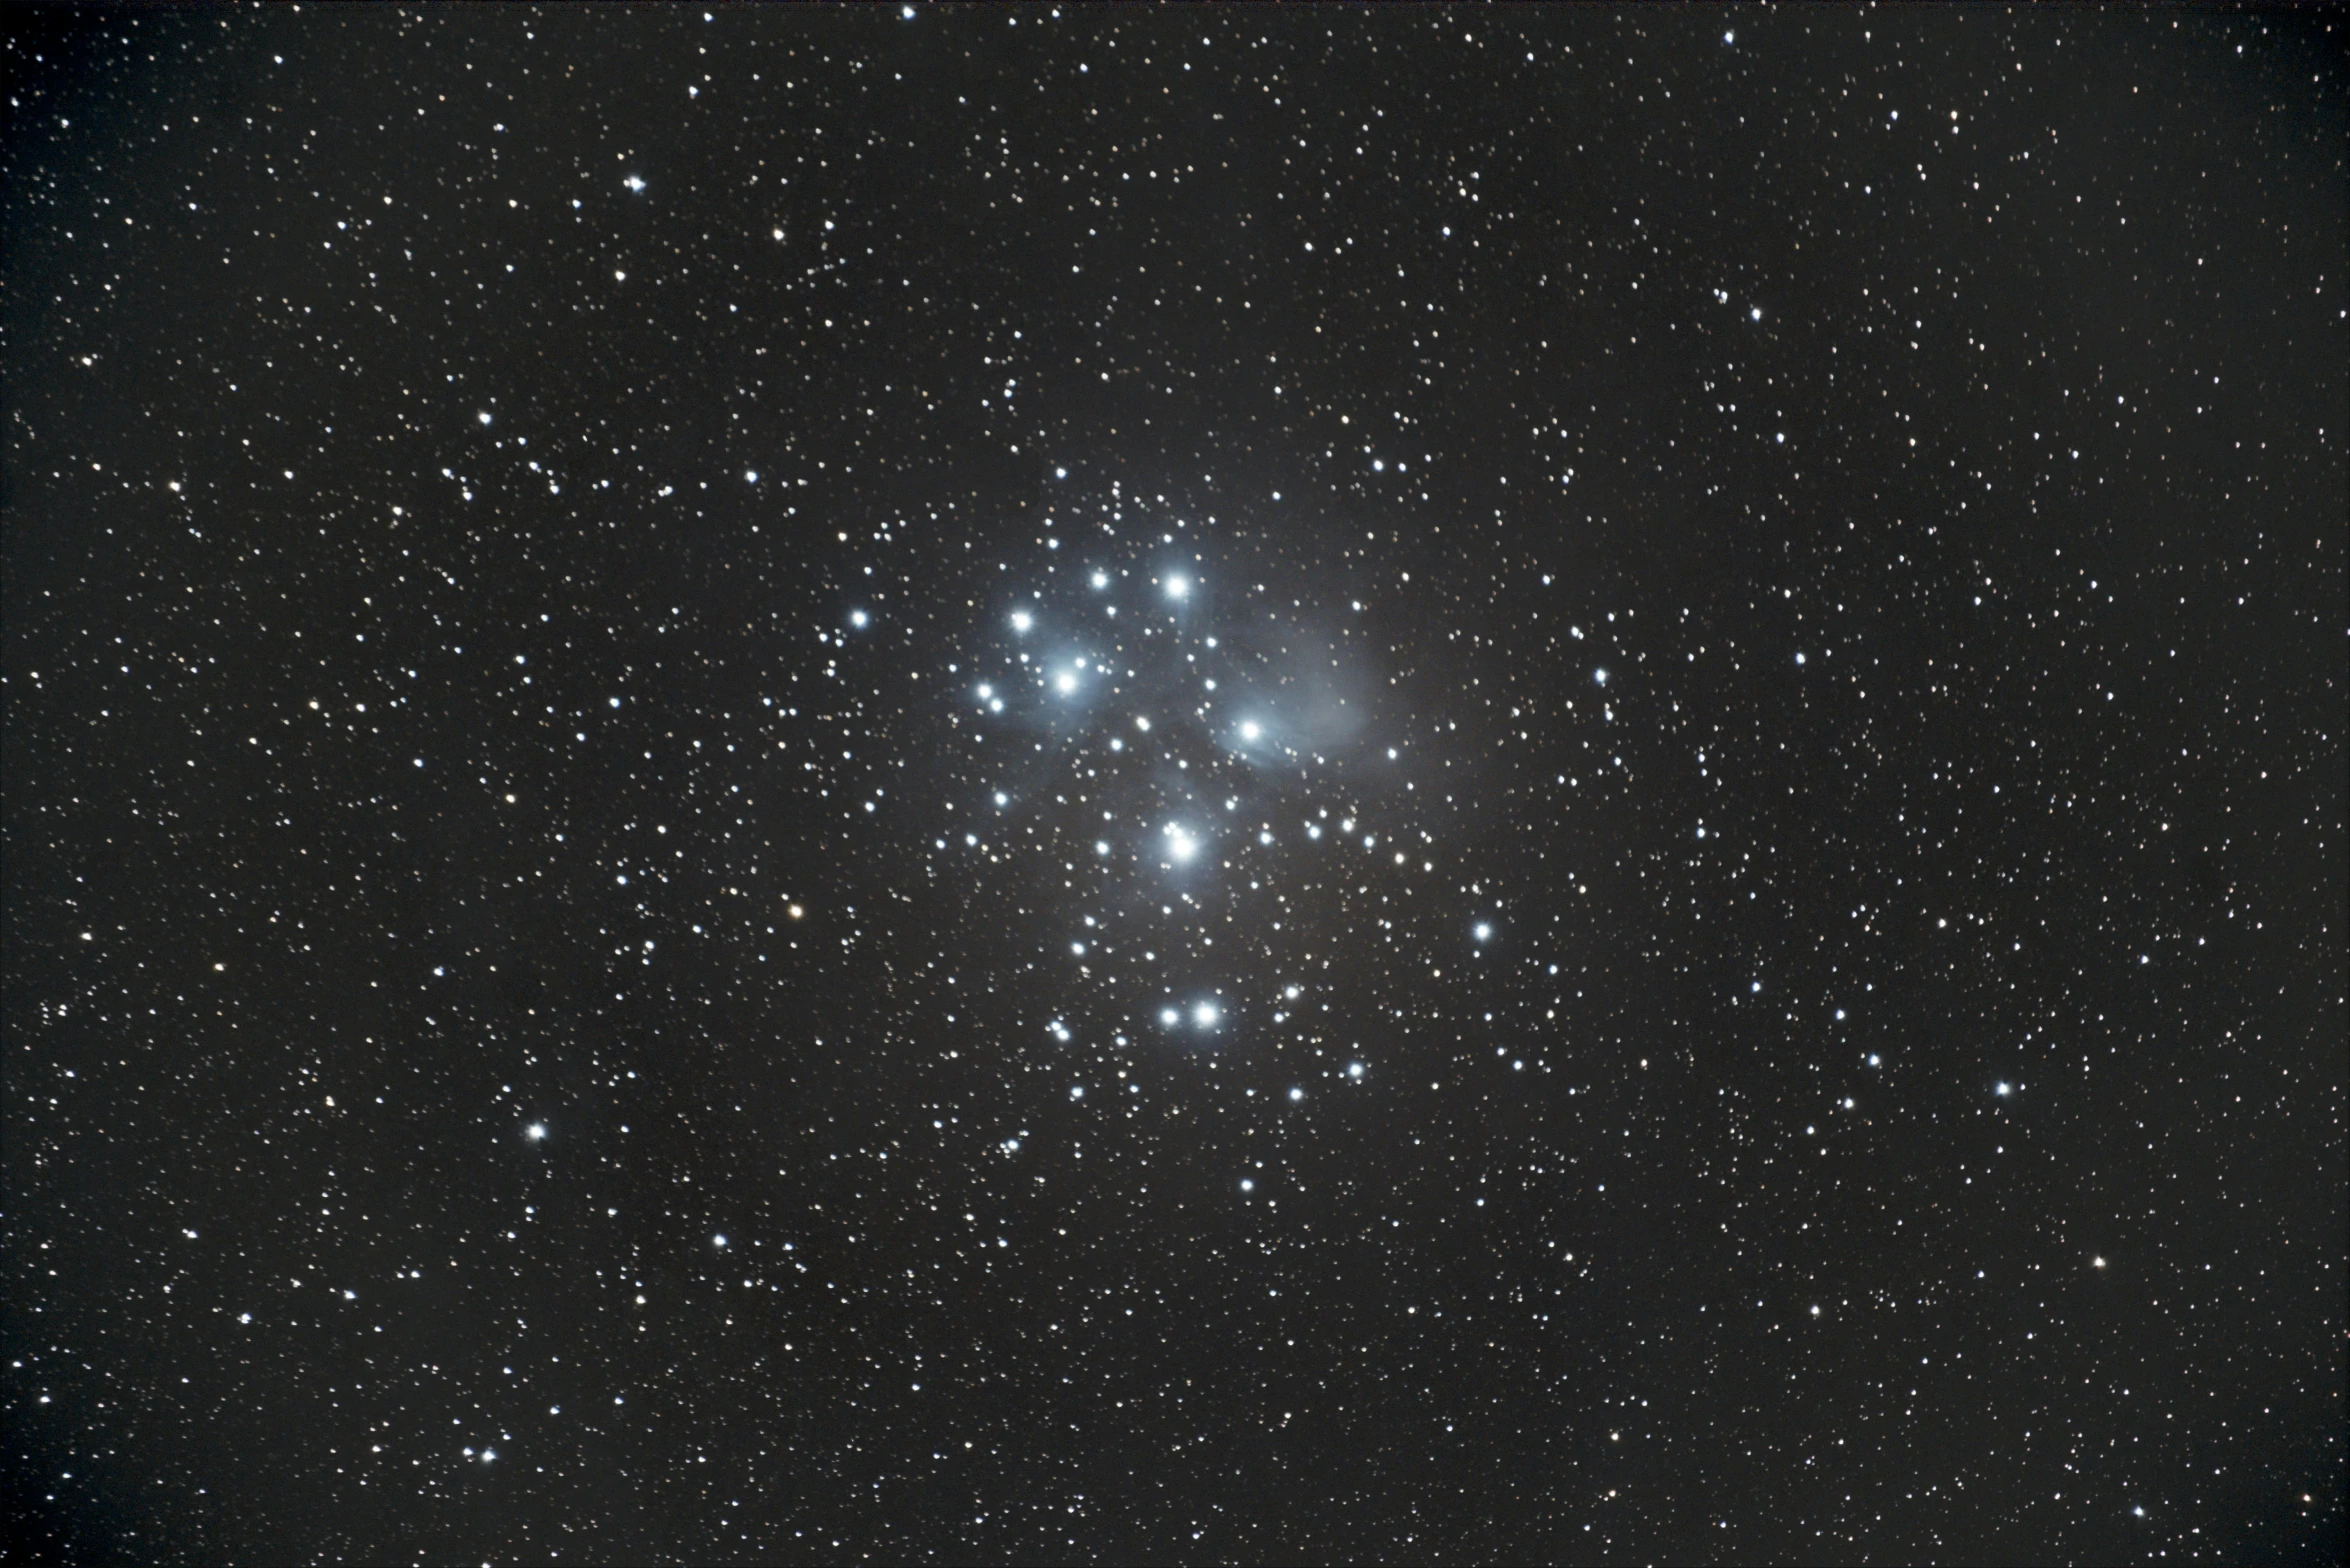 a cluster of stars in the night sky, a stipple, photograph taken in 2 0 2 0, m.zuiko 75mm, 2 d image, london